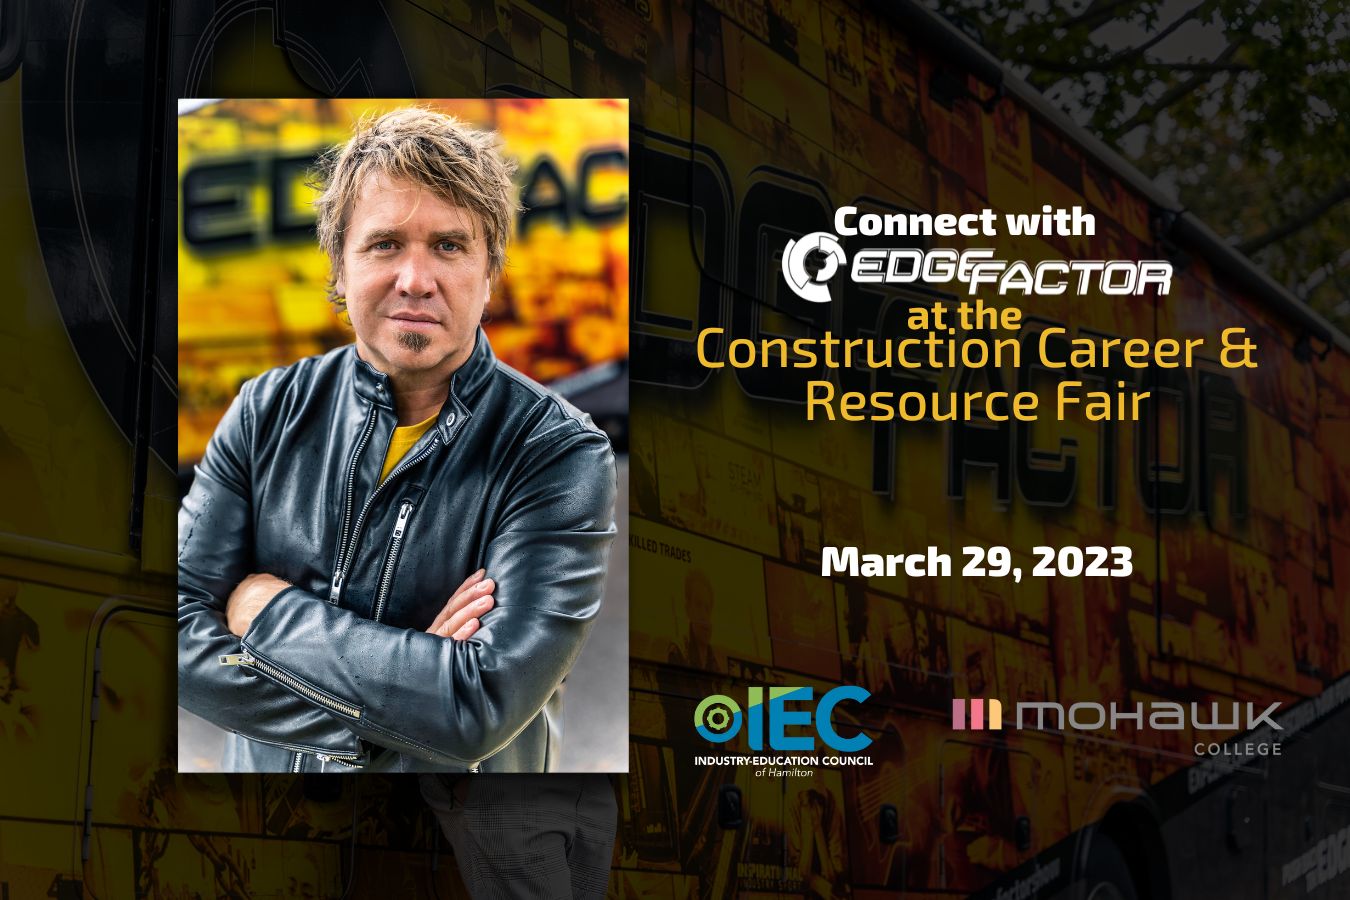 Jeremy Bout from Edge Factor will be at the Construction Career & Resource Fair at Mohawk College